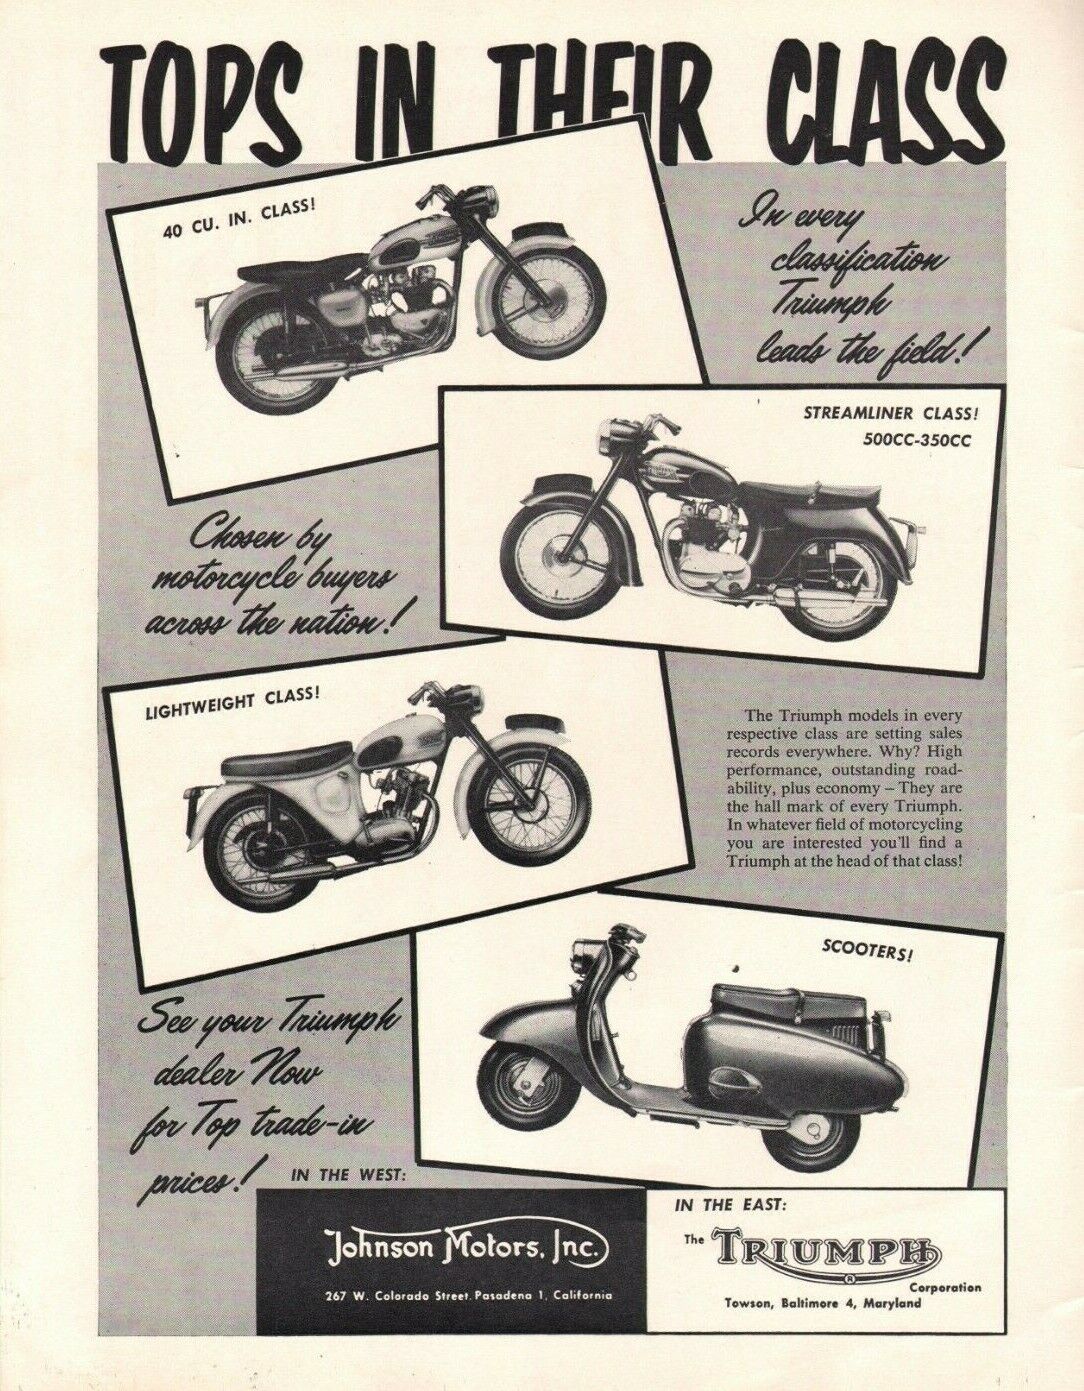 1959 Triumph \'\'Tops in Their Class\'\' - Vintage Motorcycle Ad